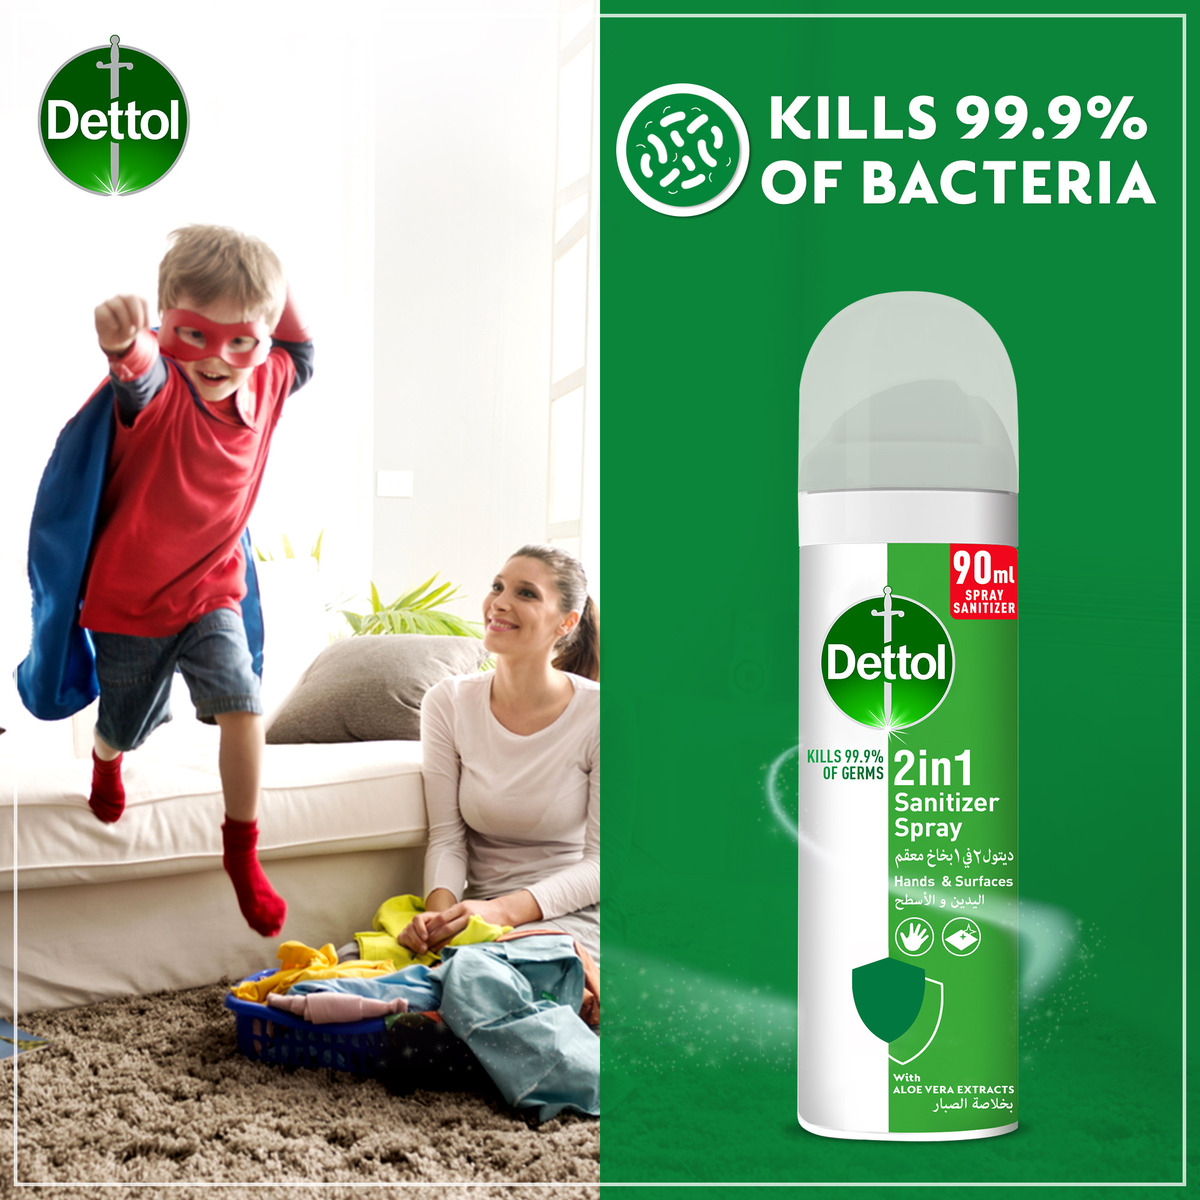 Dettol 2 In 1 Sanitizer Spray For Hands & Surfaces With Aloe Vera Extracts 90 ml